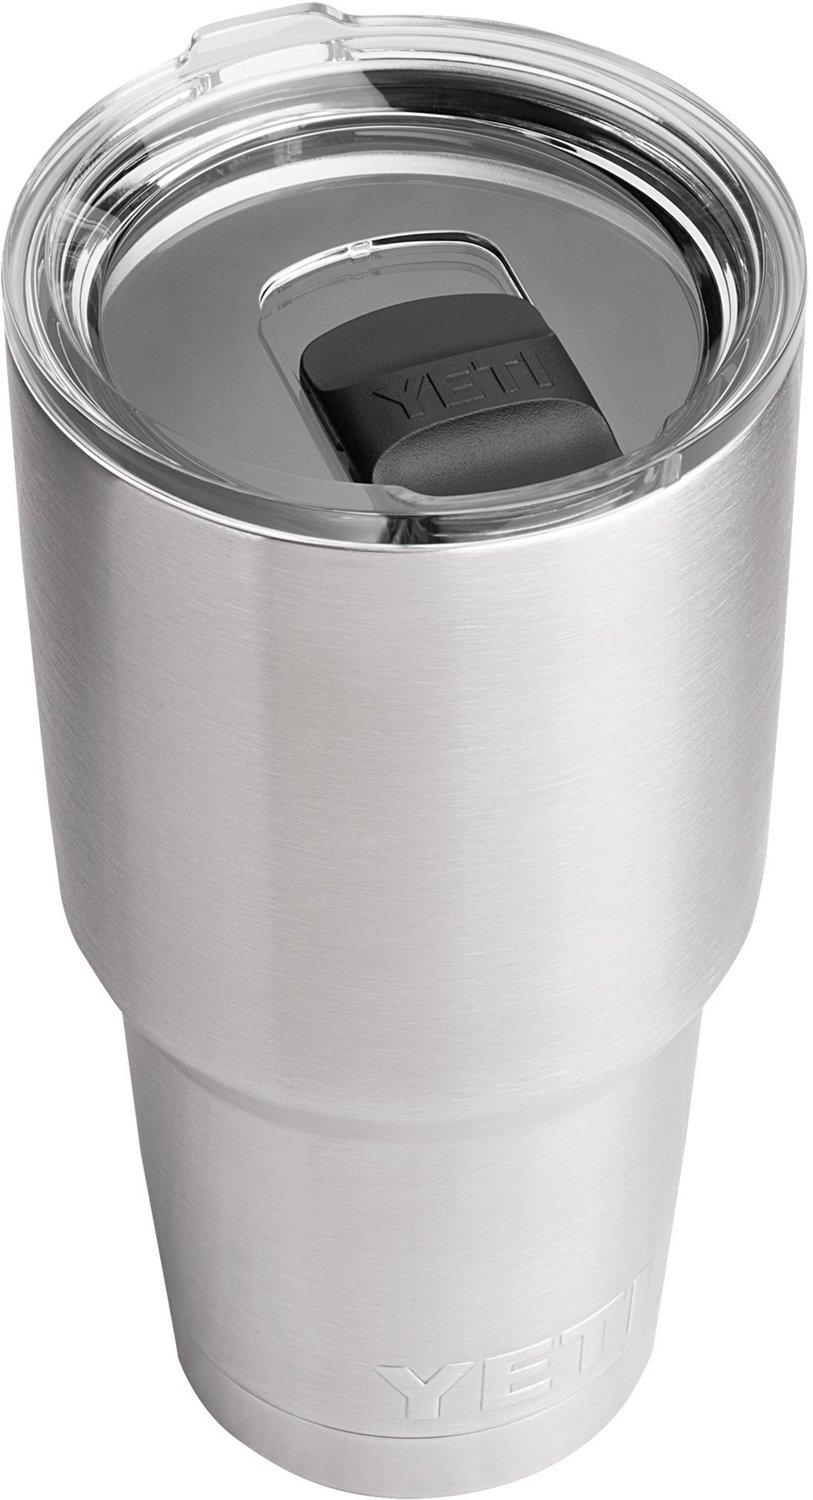 Yeti RAMBLER 26oz Cup Or 30 Oz Tumblr STRAW & LID Replacement - Pasadena  Music Academy – Music Lessons in Pasadena